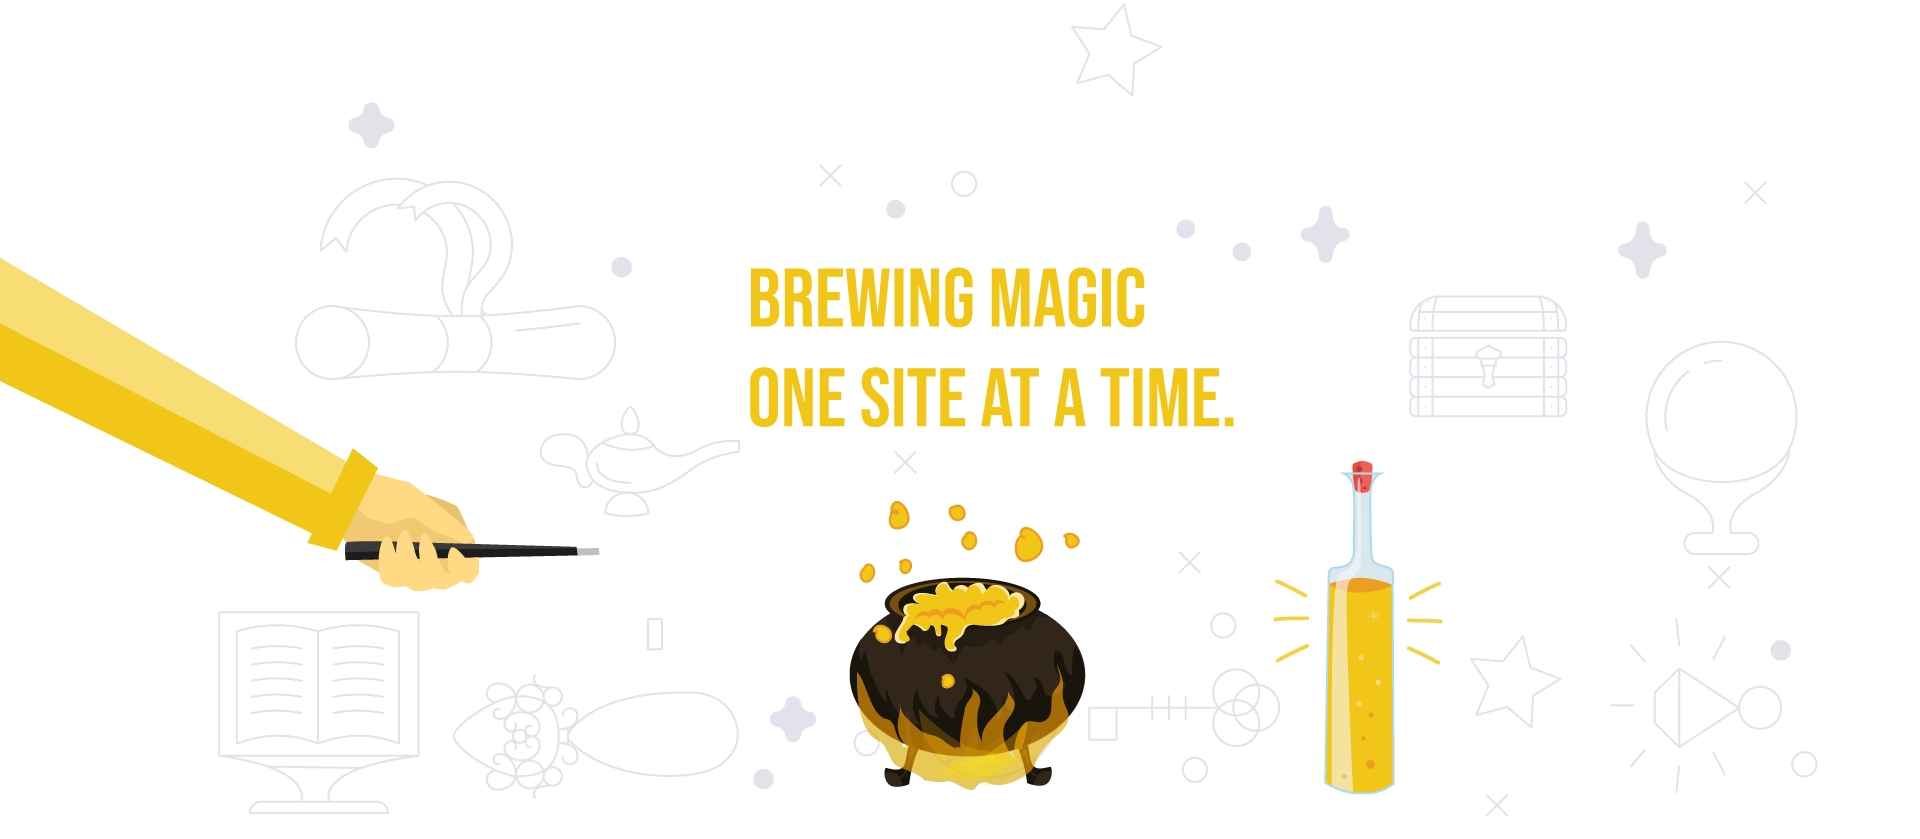 Bewing Magic One Site at a Time section